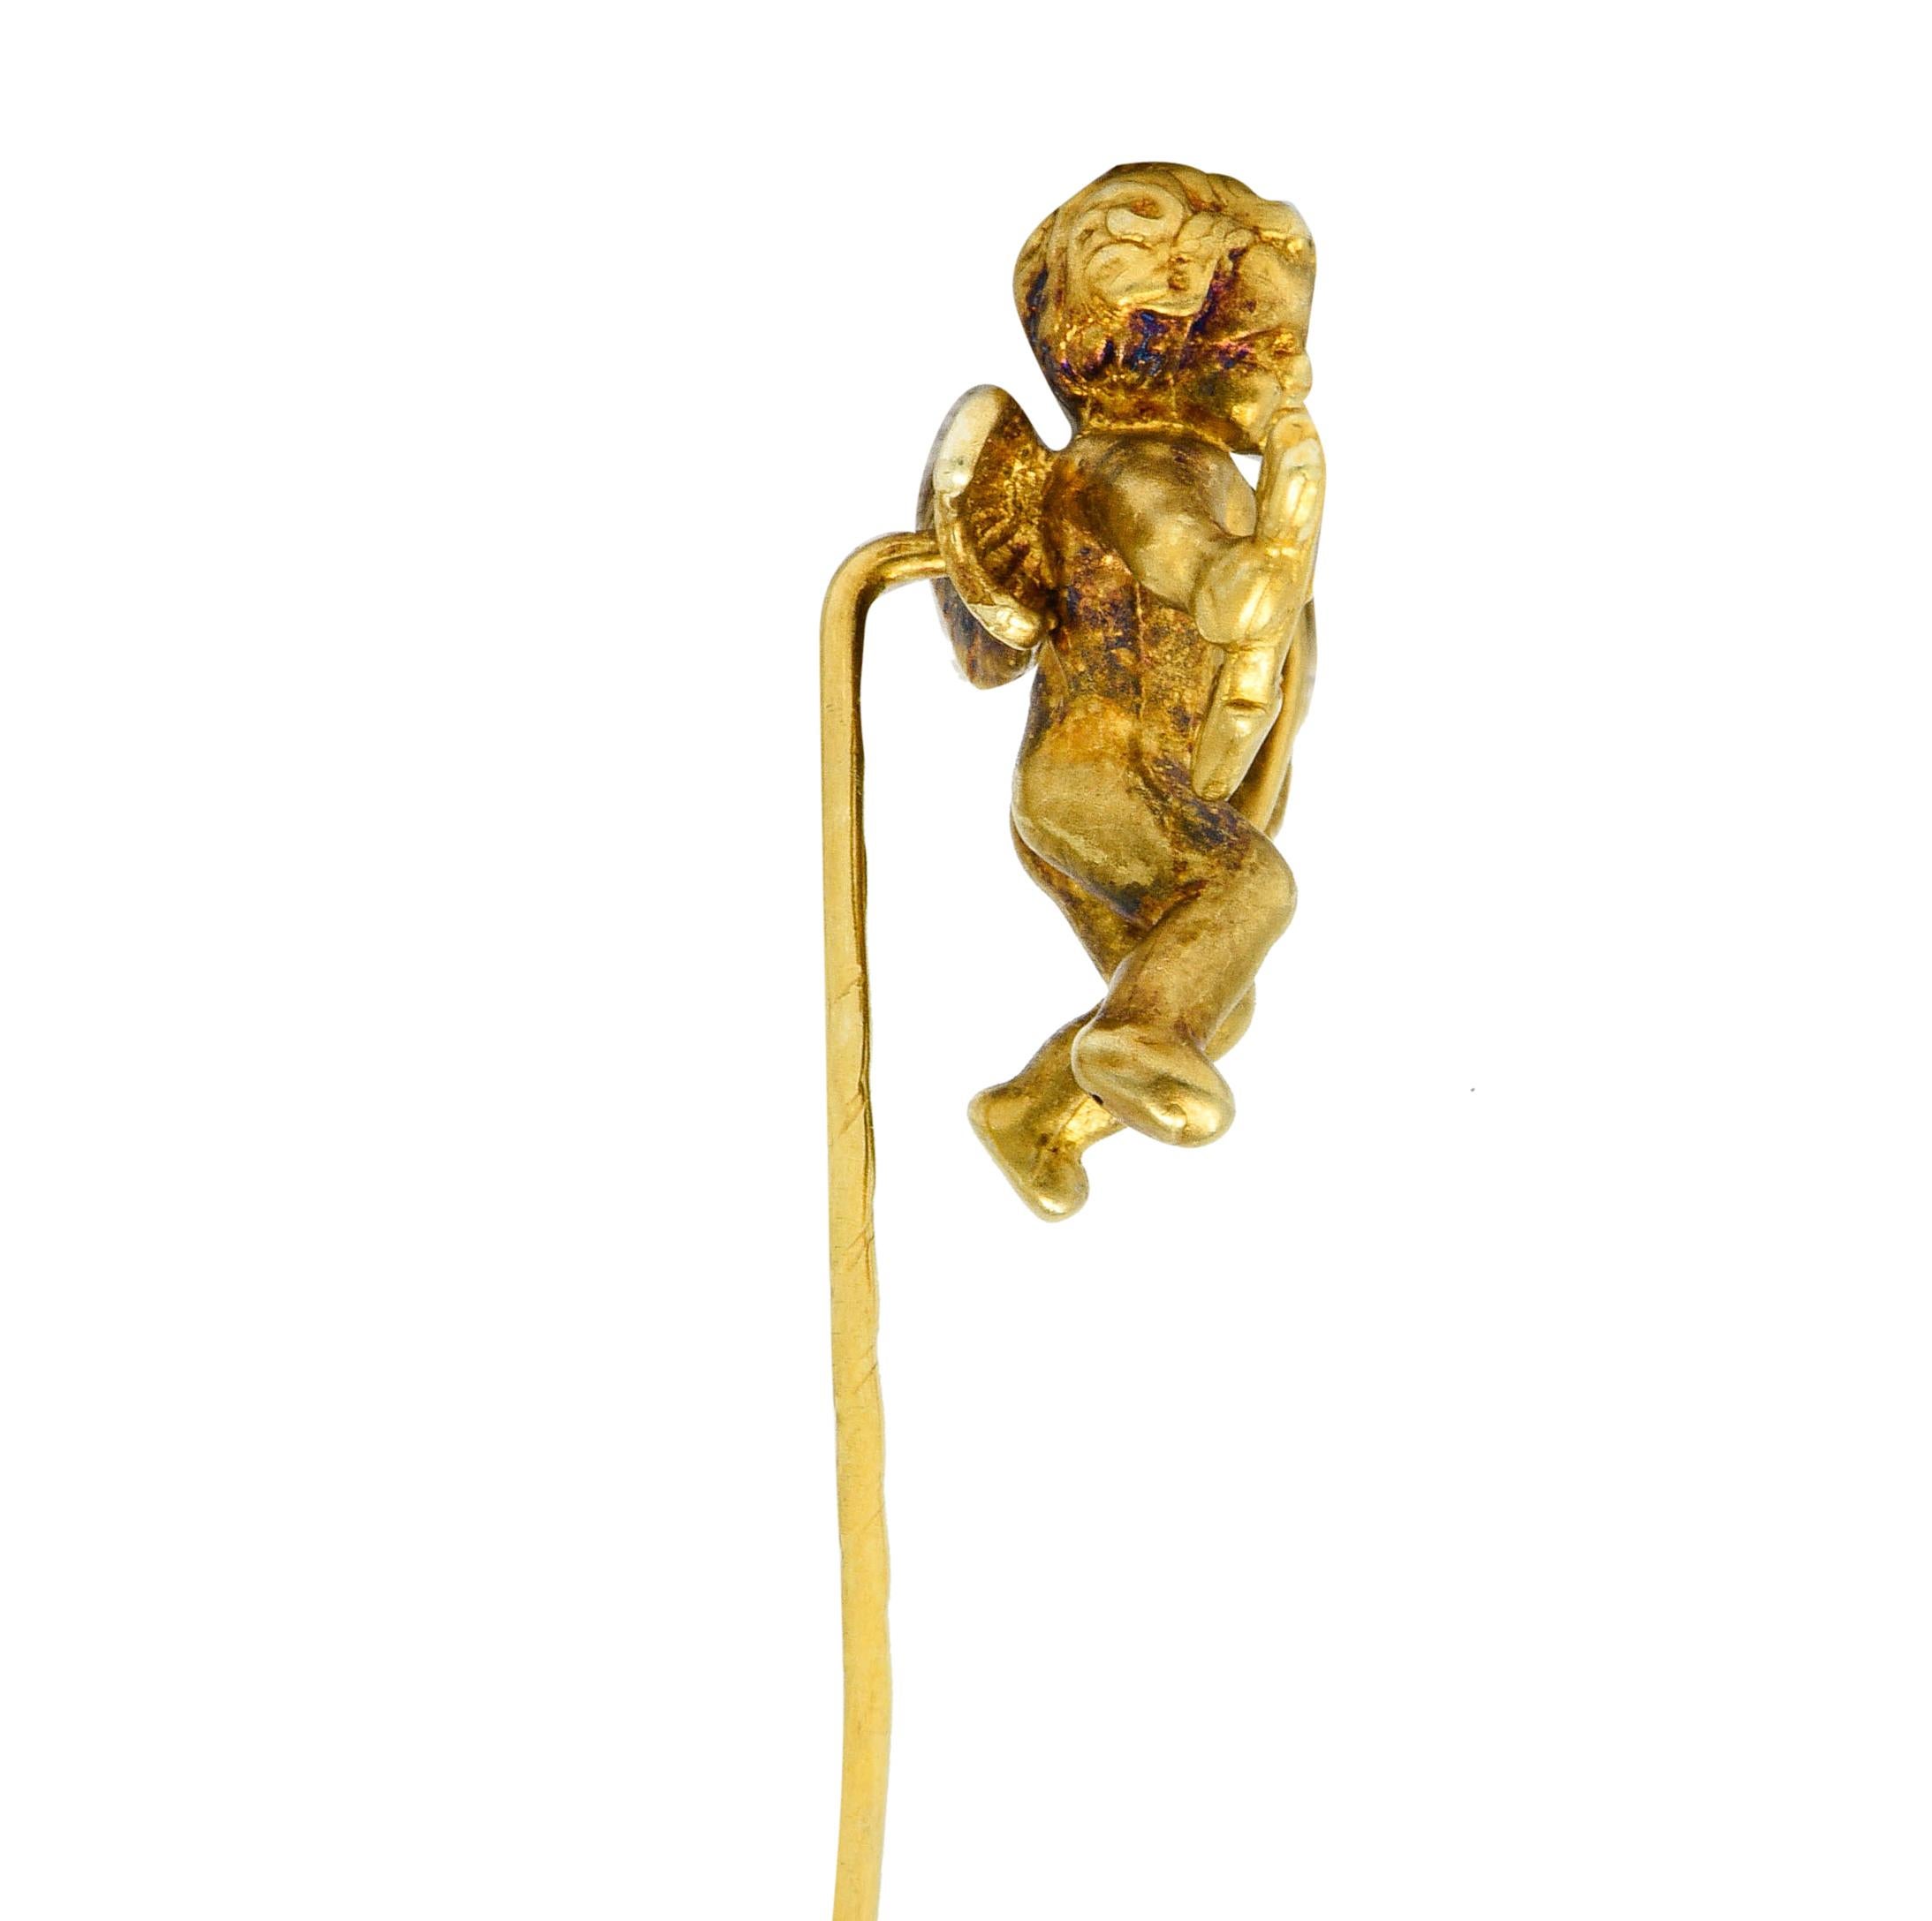 Designed as a highly rendered cherubic cupid

With dainty stylized wings while holding a bow and a single arrow

Maker's mark and stamped 14K for 14 karat gold

Circa: 1880’s

Cupid measures: 3/4 x 7/8 inch

Total length: 2 inches

Total weight: 1.7